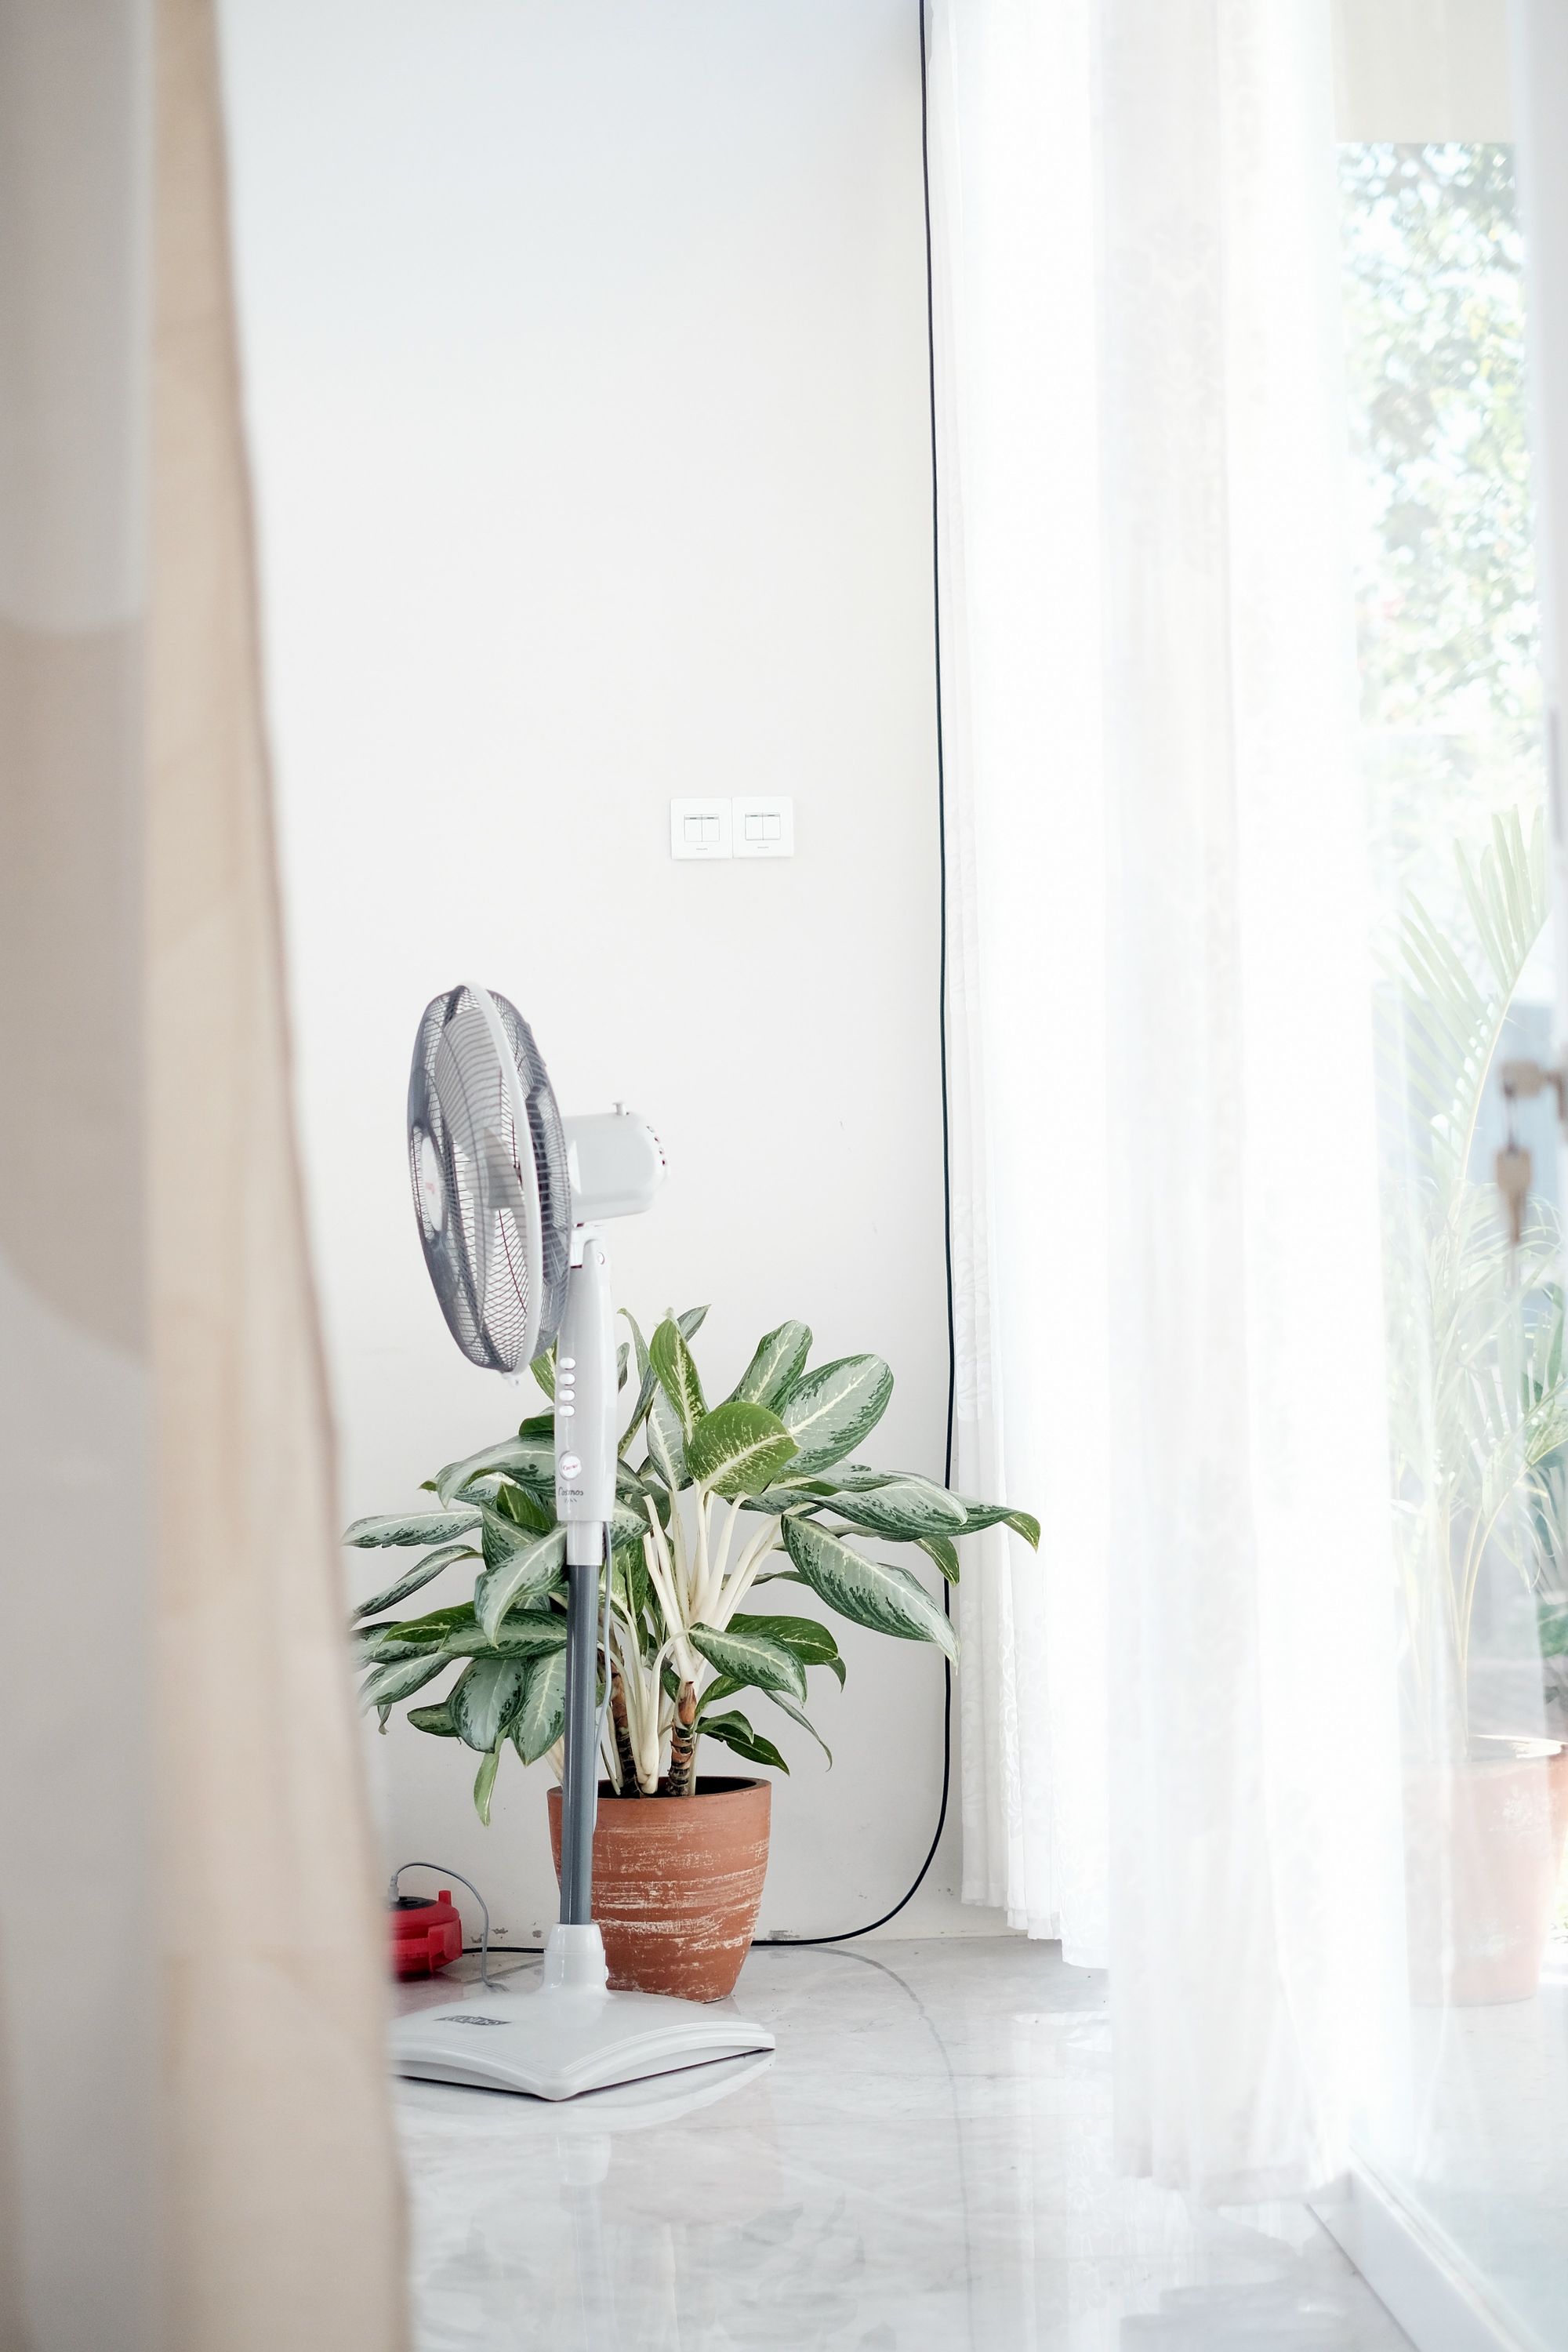 Shan Wong - Standing fans and ceiling fans, as well as air-conditioning, help to move air and keep the place dry.